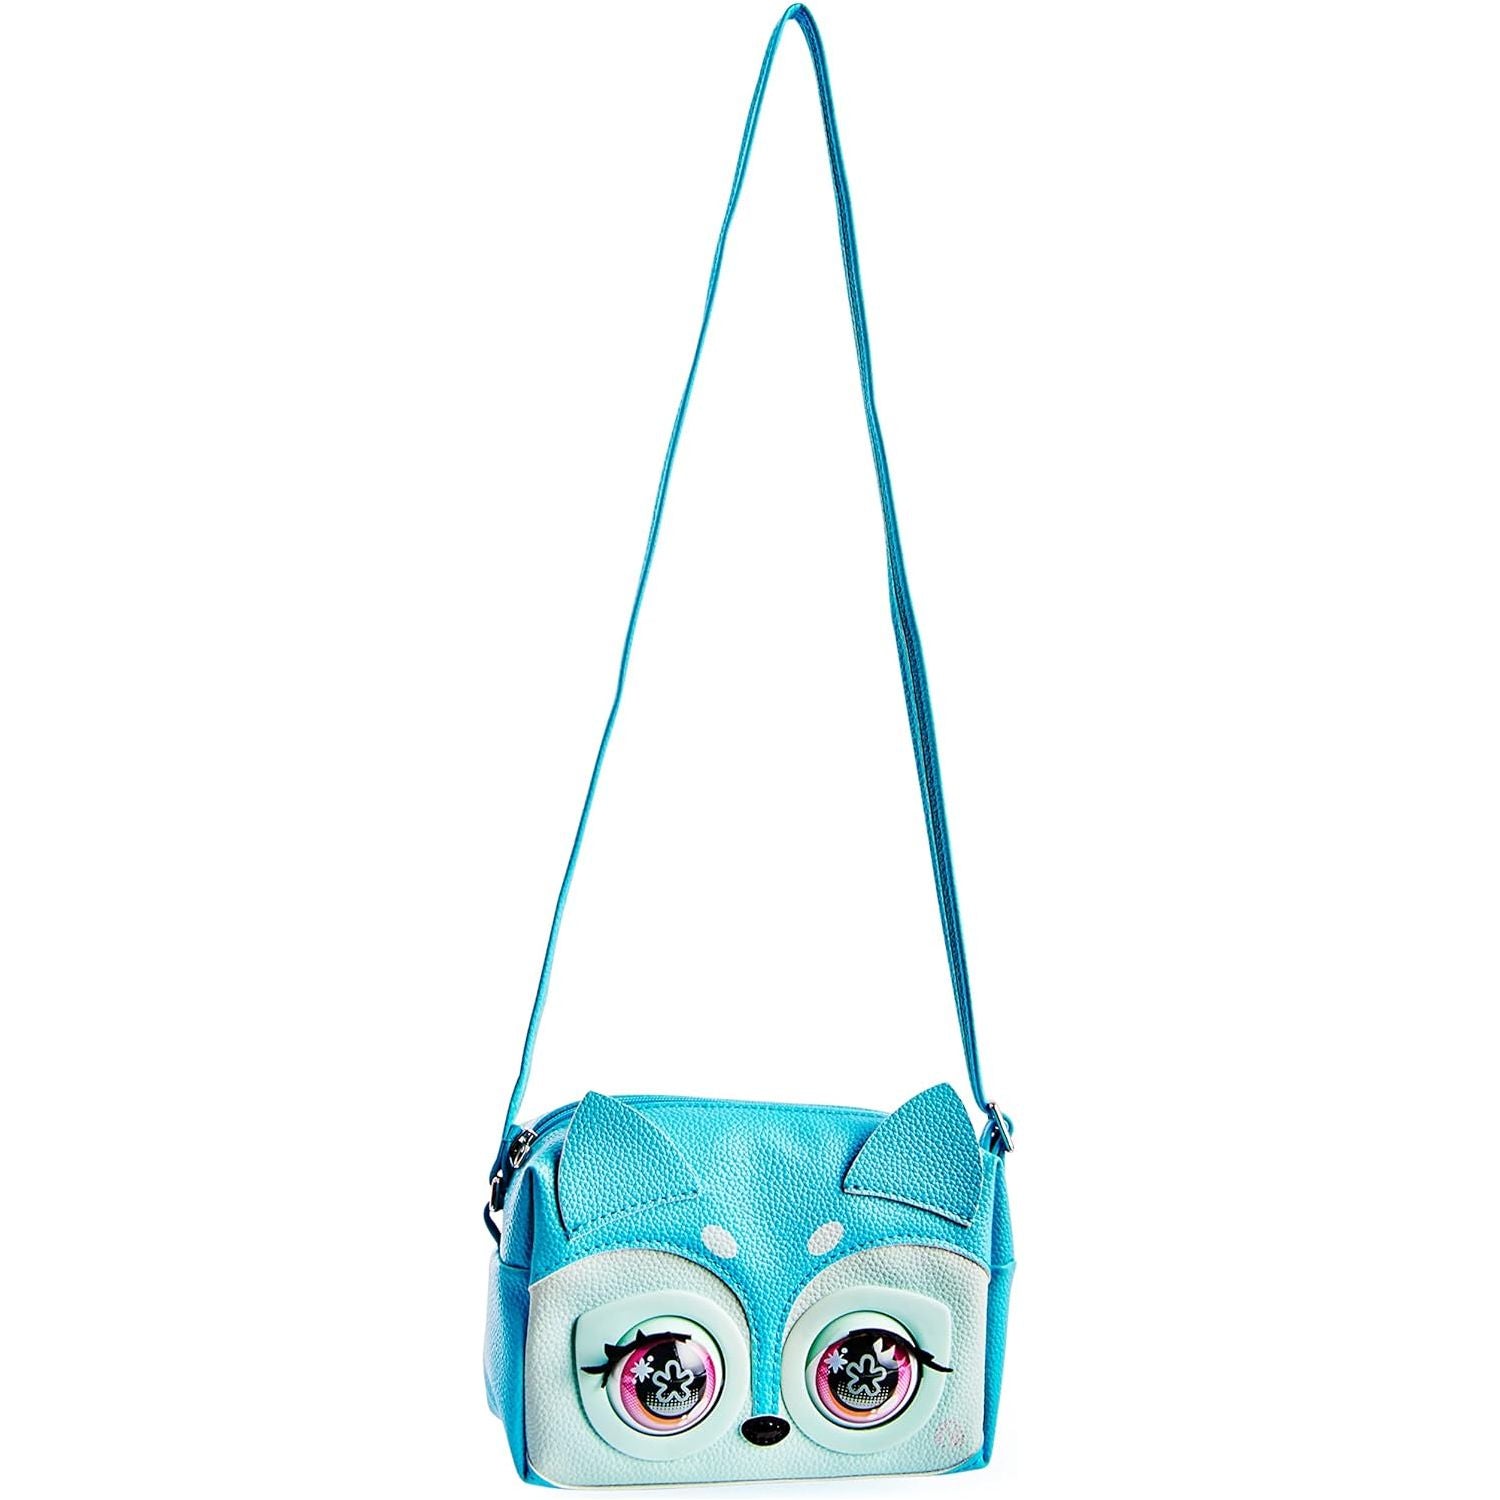 Purse Pets, Fierce Fox Interactive Pet Toy & Crossbody Kids Purse with Over 25 Sounds and Reactions, Shoulder Bag for Girls, Trendy Tween Gifts